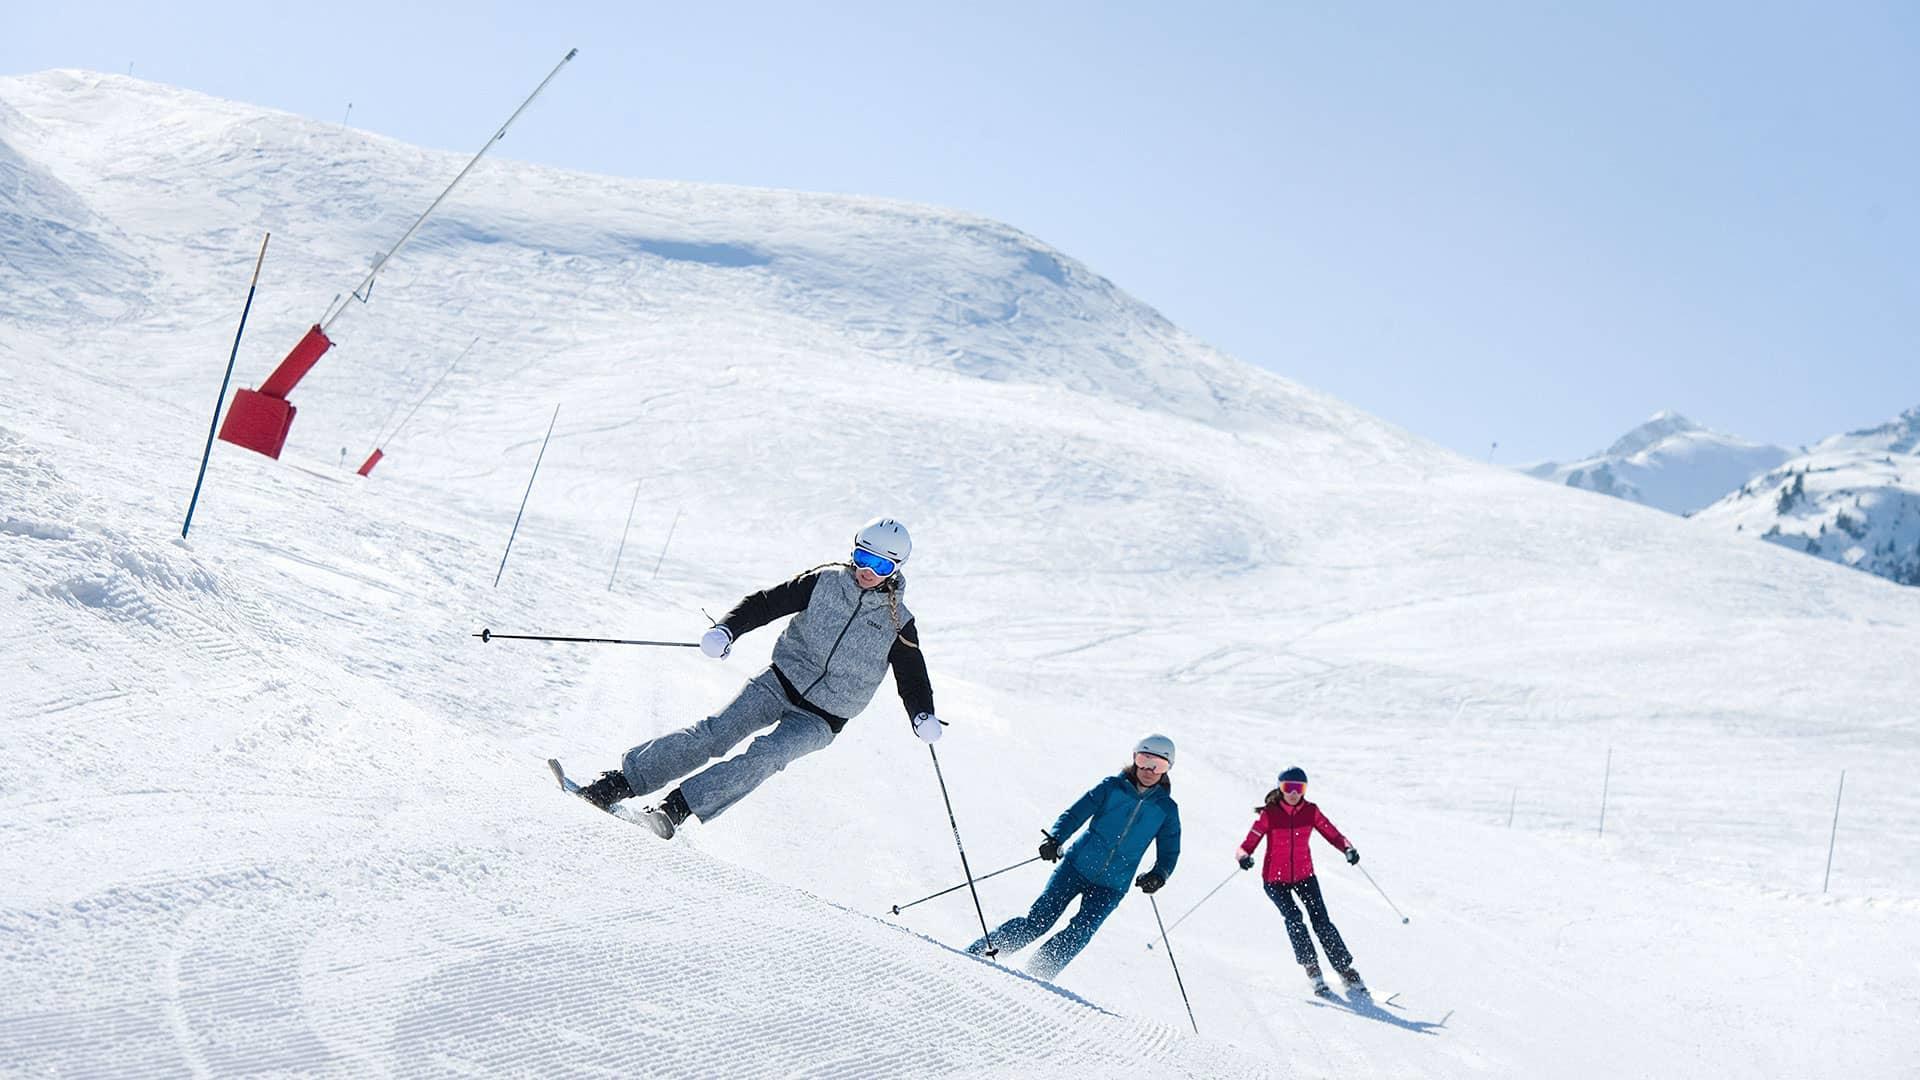 Late April special rates on skipasses